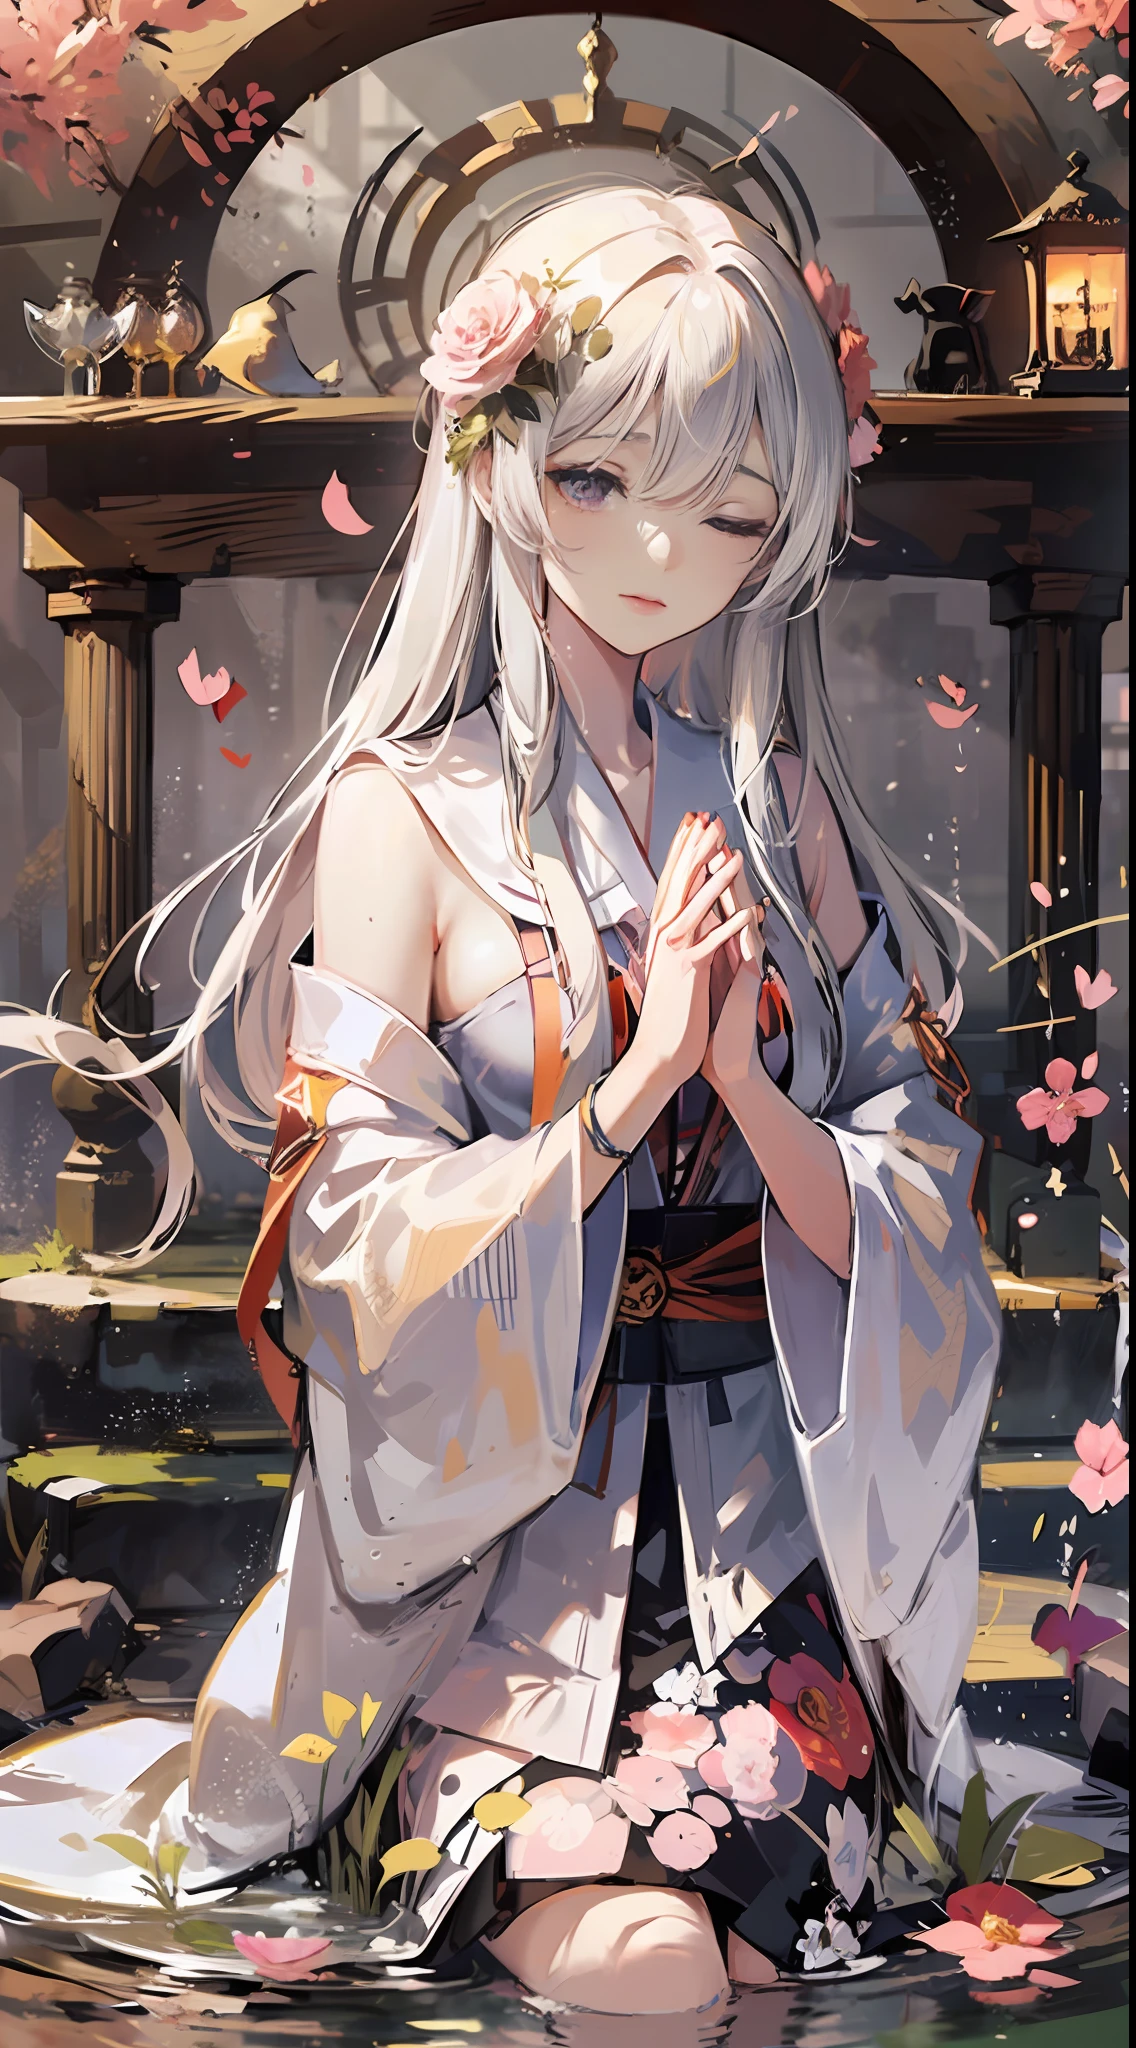 White-haired, teens girl, Shrine, DOA, Cherry blossoms, Graceful, serene, Flowing white robe, spiritual connection, Grace, reverence, sacred space, Incense, spiritual ambiance, cradling hands, Eyes closed, deep concentration, devotion, faith, Delicate, Drifting, breeze, Pink petals, Poetic, transient, transient, Beauty, Presence, Tranquility, spiritual connection, earthly realm, Divine, conduit, Humanity, divino, Enchanting, harmonious, Profound, reverence.